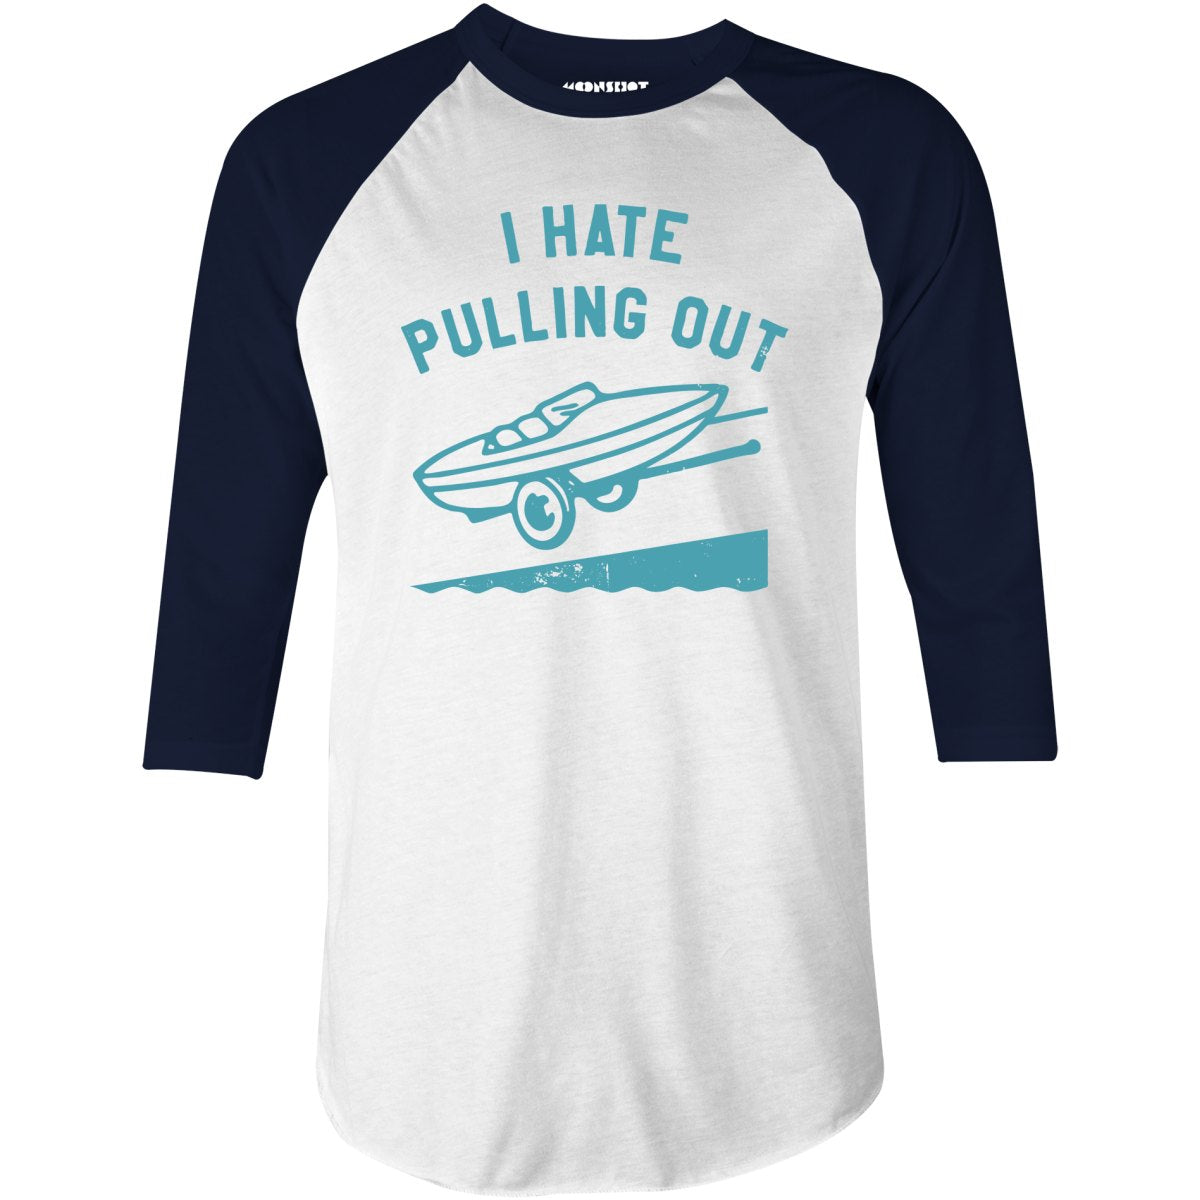 I Hate Pulling Out - 3/4 Sleeve Raglan T-Shirt